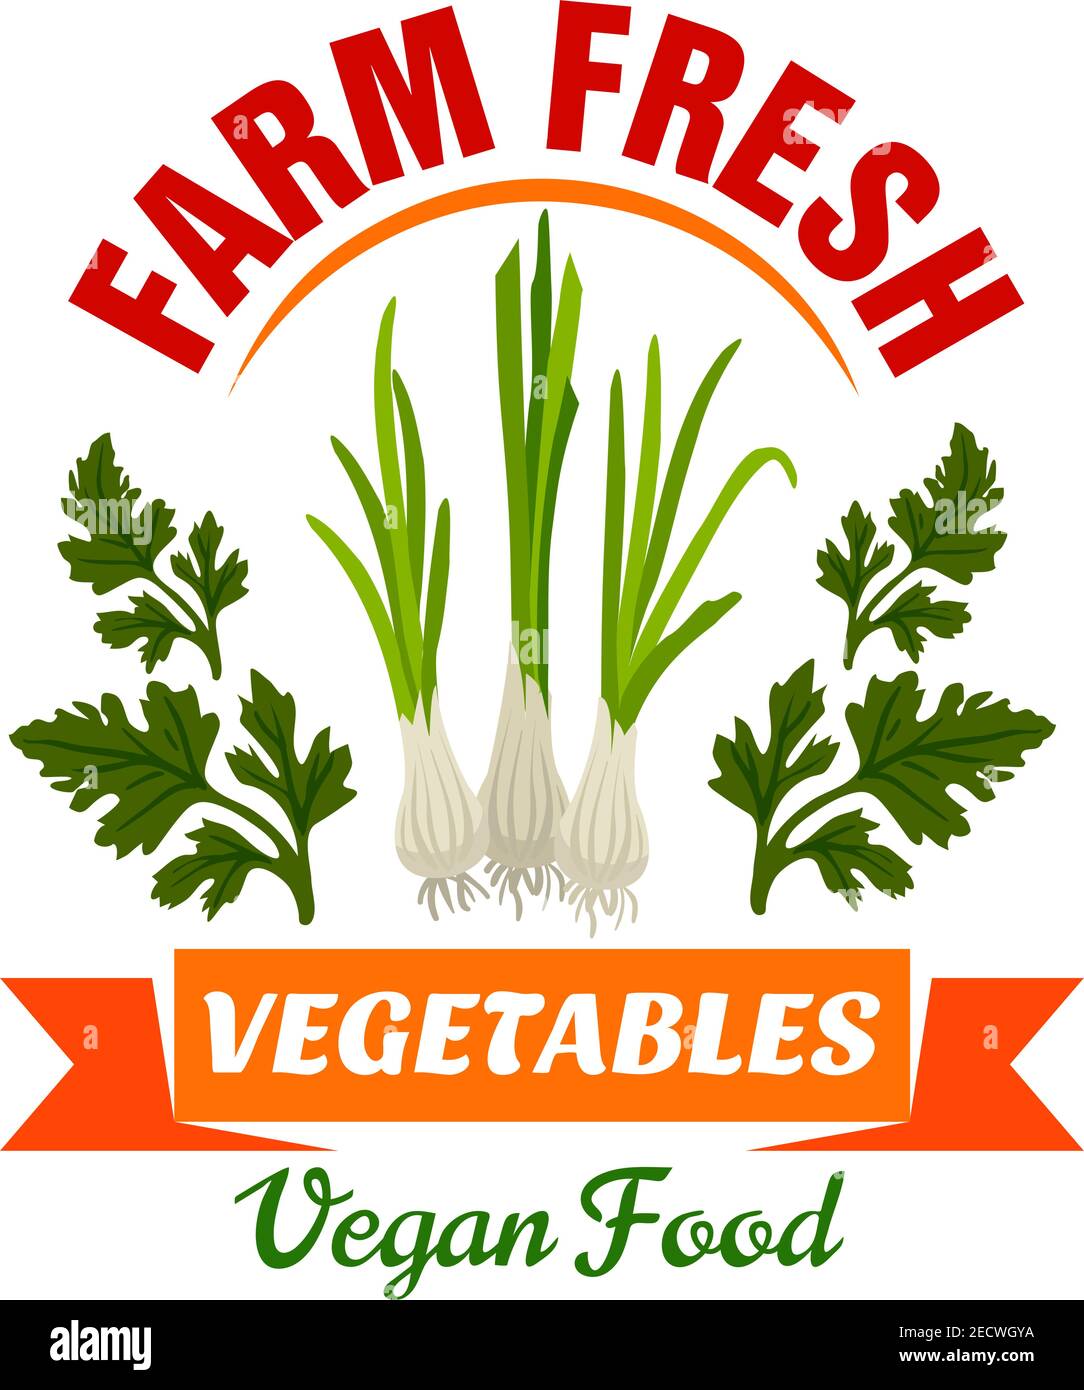 Onion, leek, welsh onion. Farm fresh vegetable product emblem. Premium healthy vegan food icon with orange ribbon and parsely leaves. Vector vegetable Stock Vector